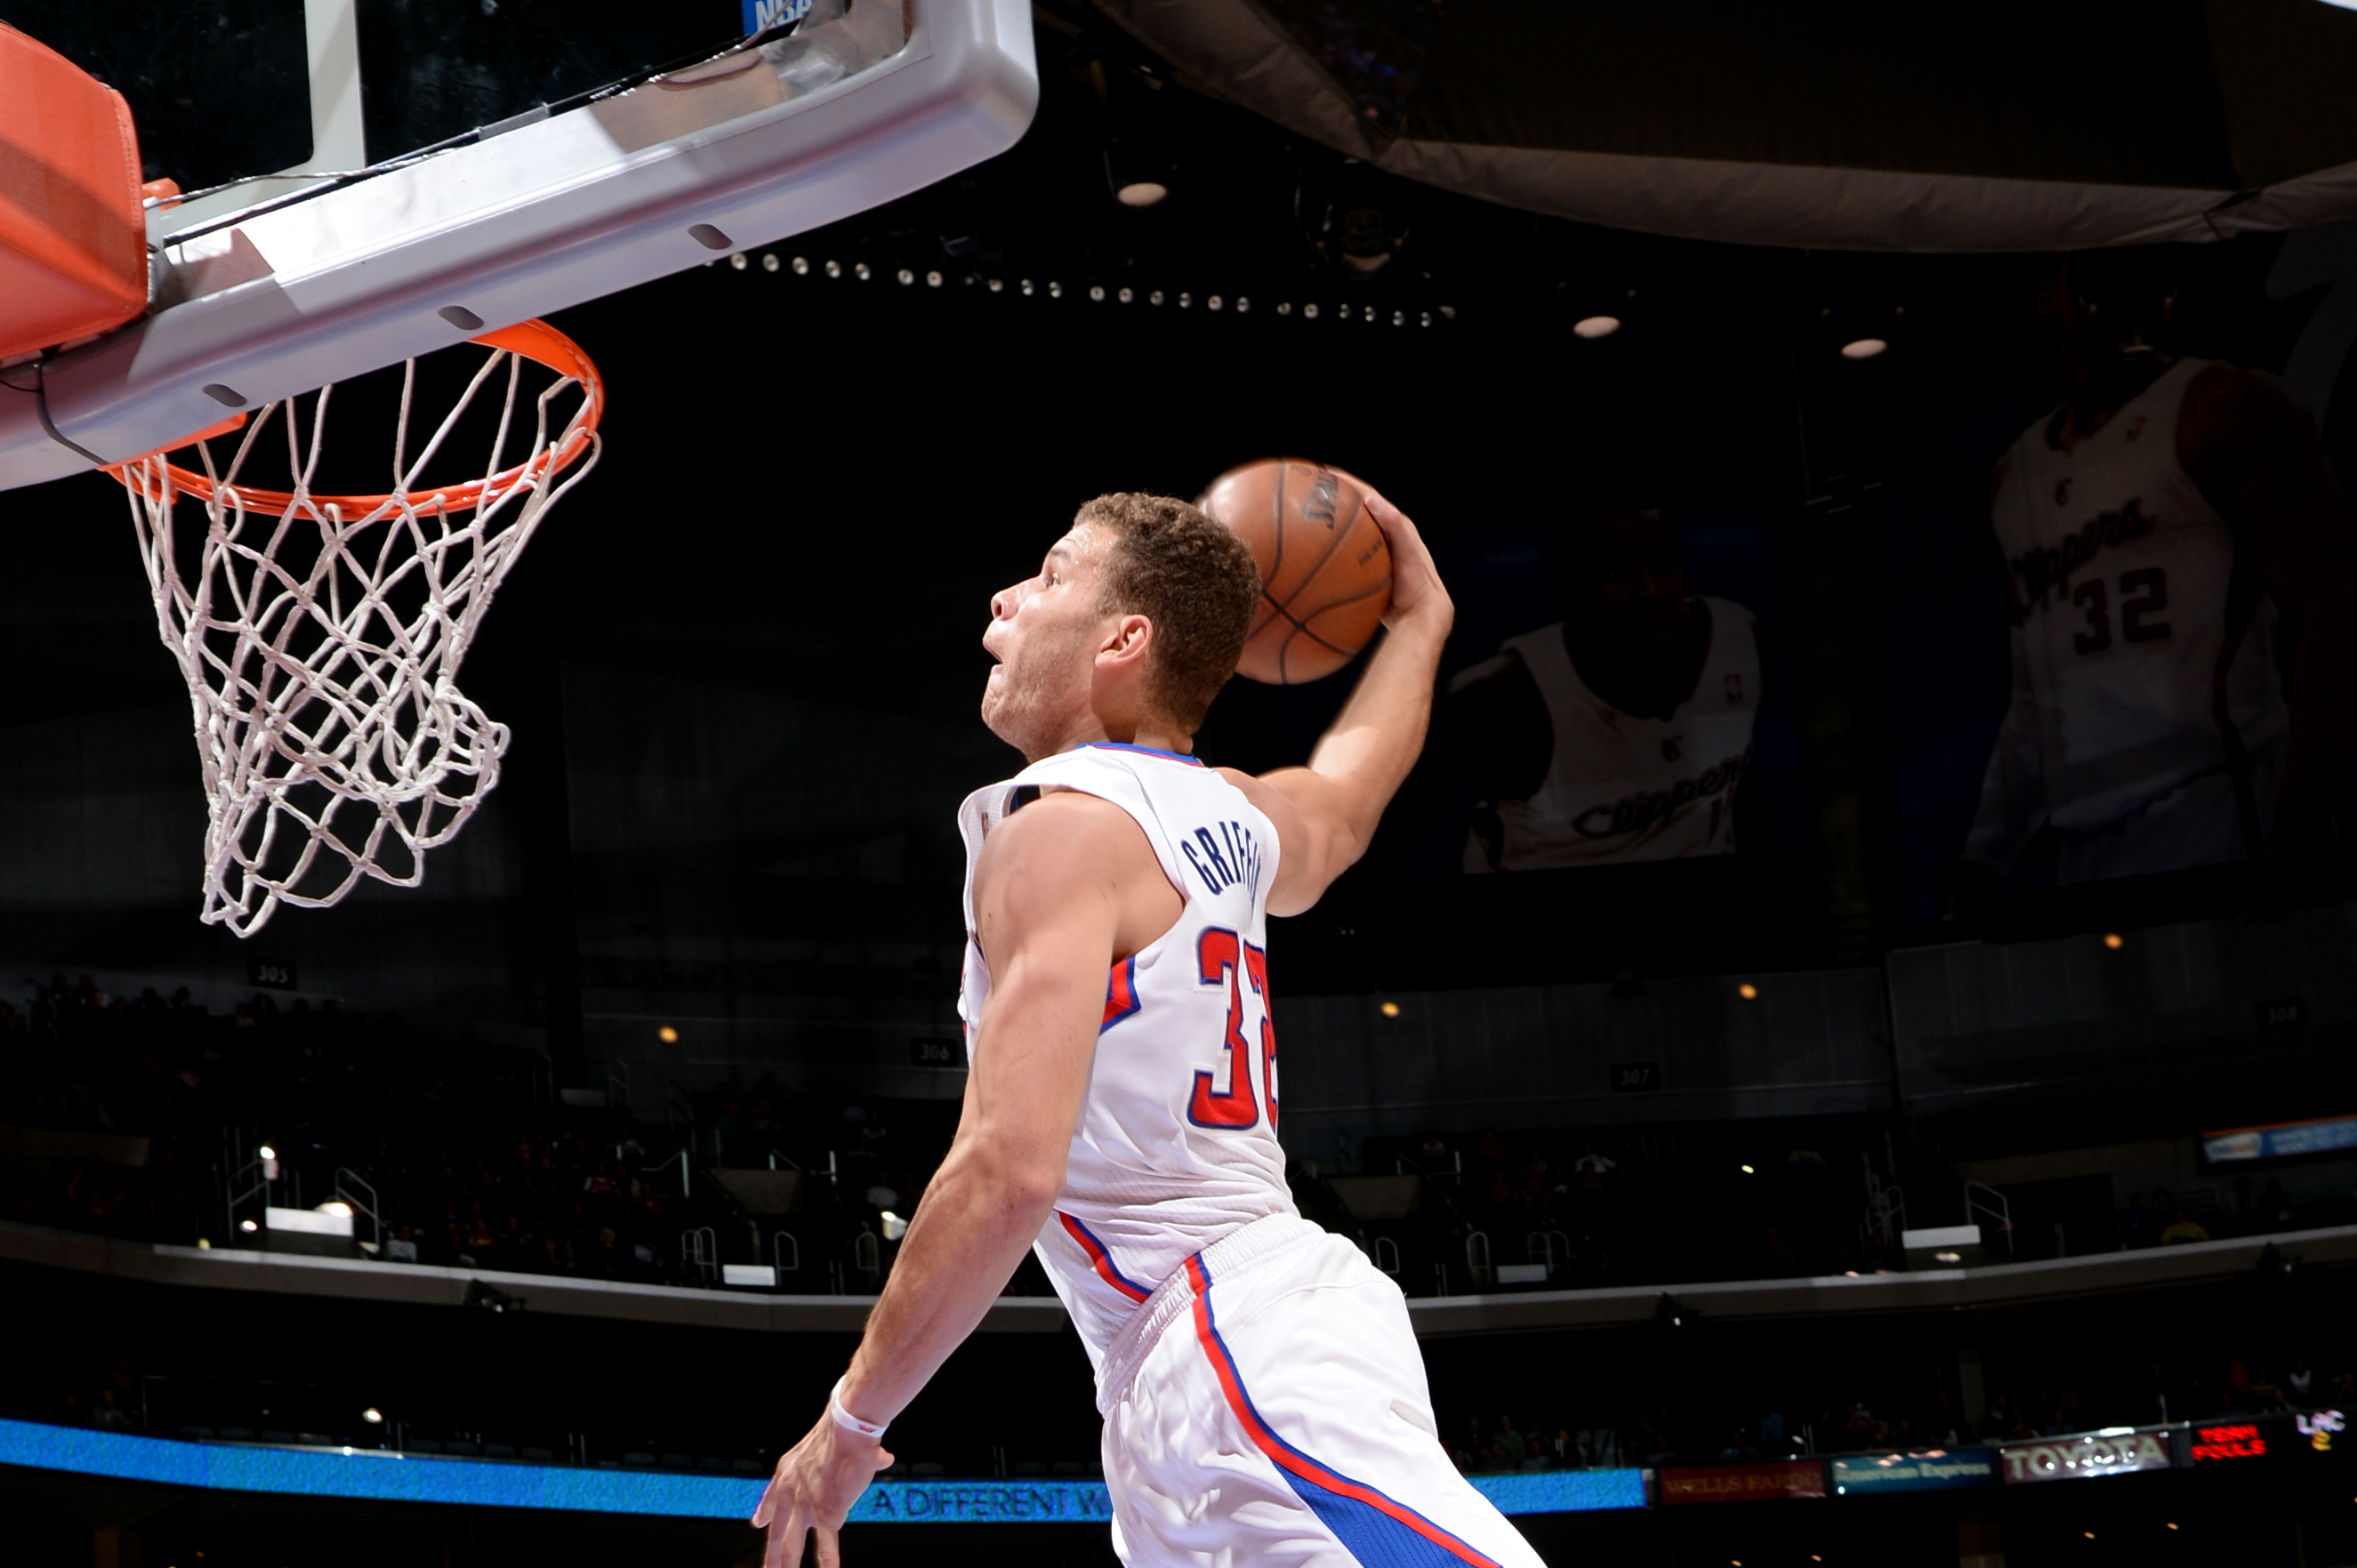 Los Angeles is feeling the Blake Griffin Effect